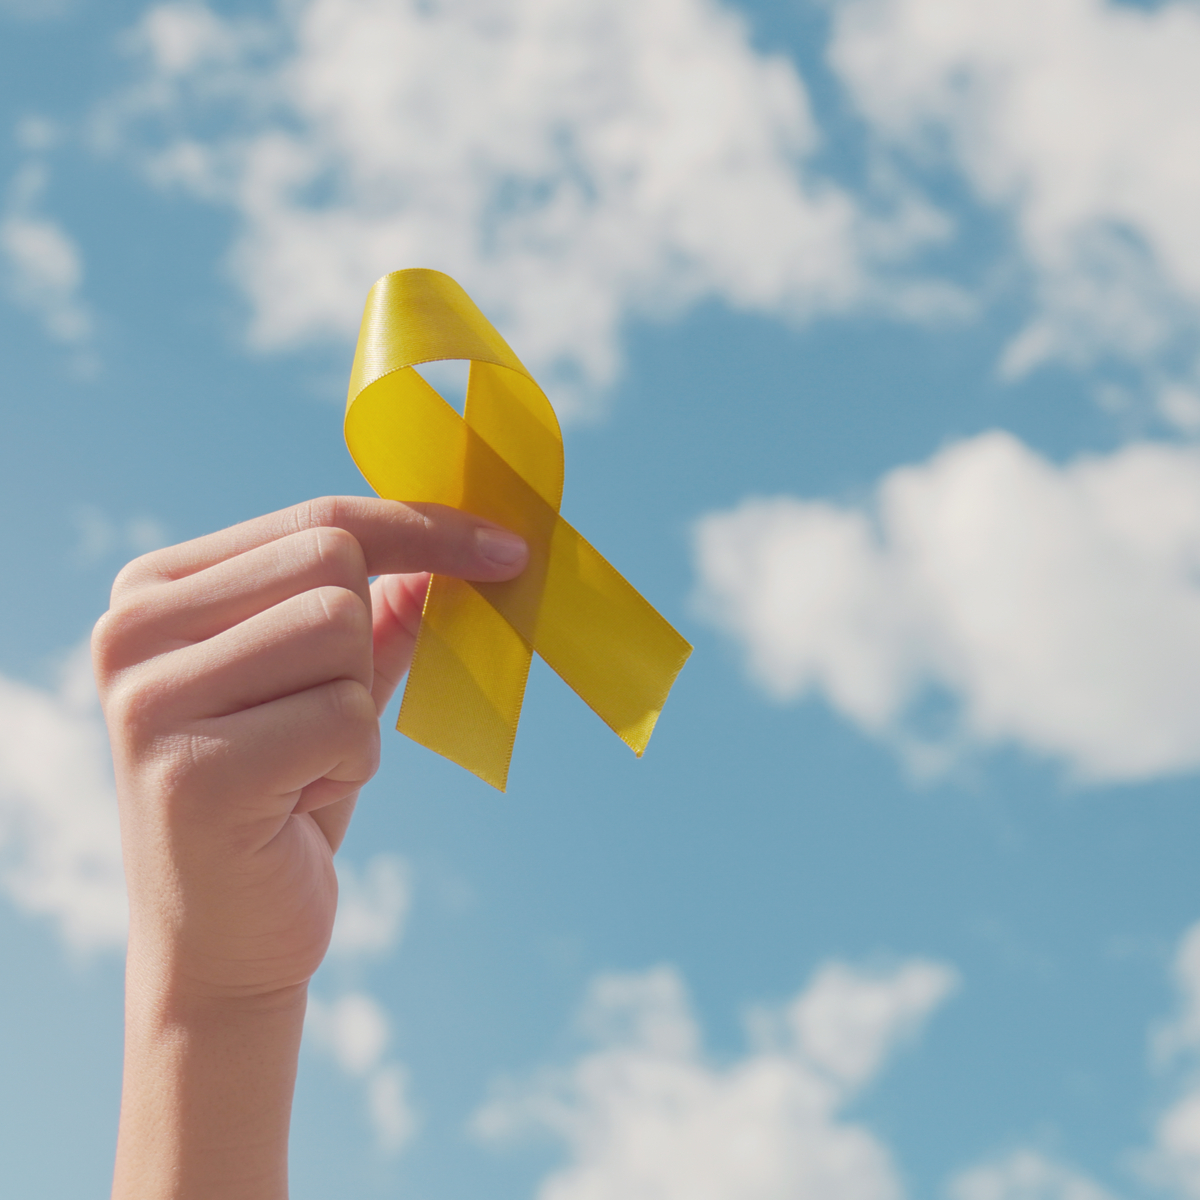 5 Important Facts to Know About Sarcoma